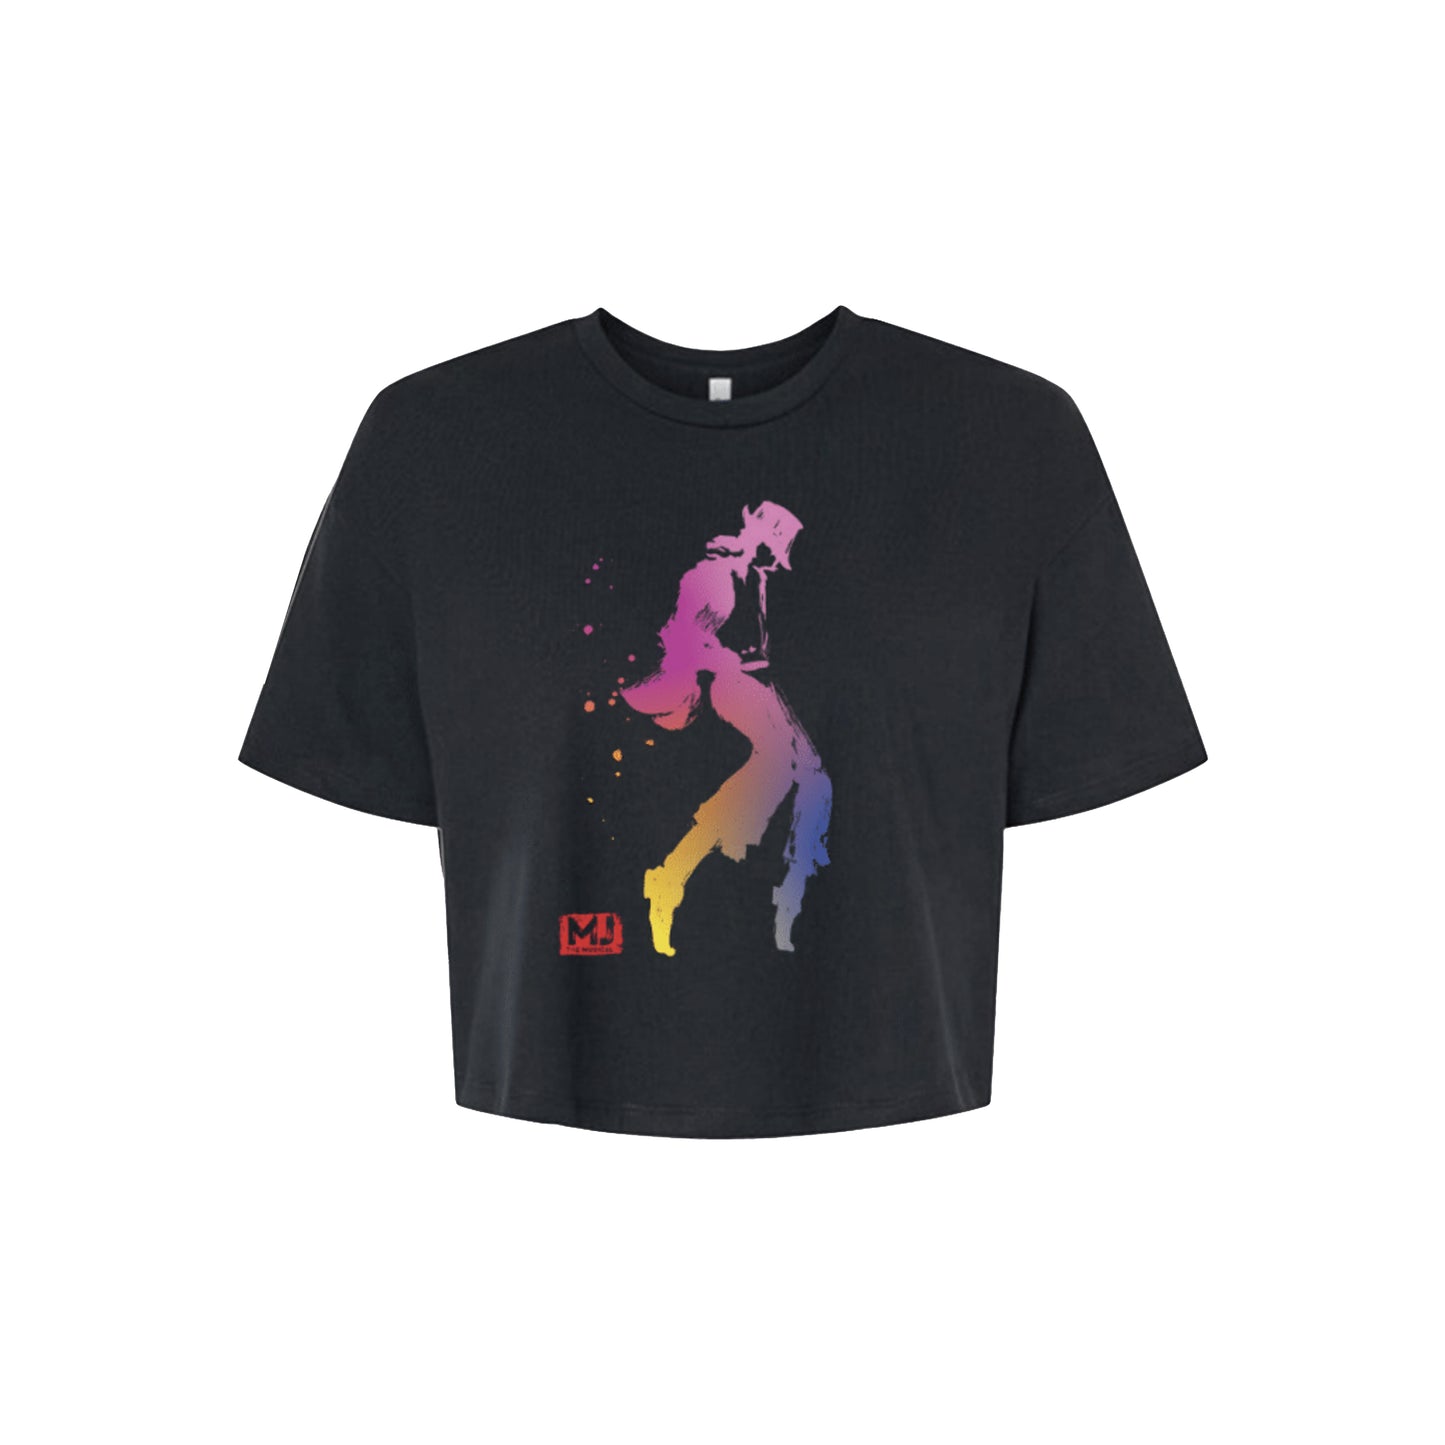 MJ THE MUSICAL Watercolour Cropped T-Shirt